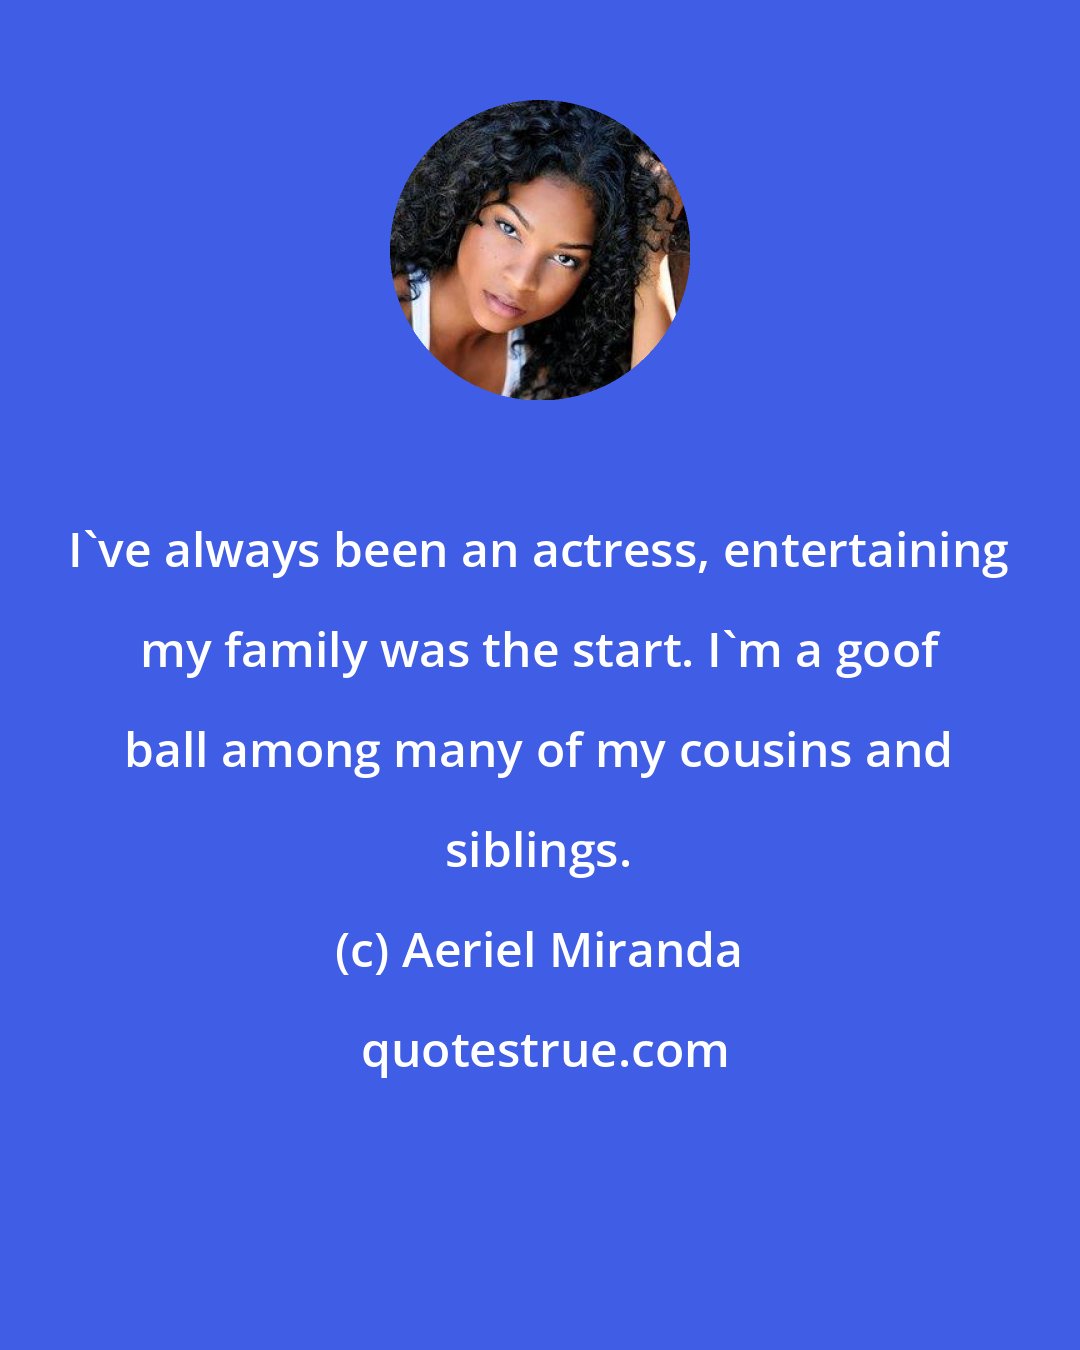 Aeriel Miranda: I've always been an actress, entertaining my family was the start. I'm a goof ball among many of my cousins and siblings.